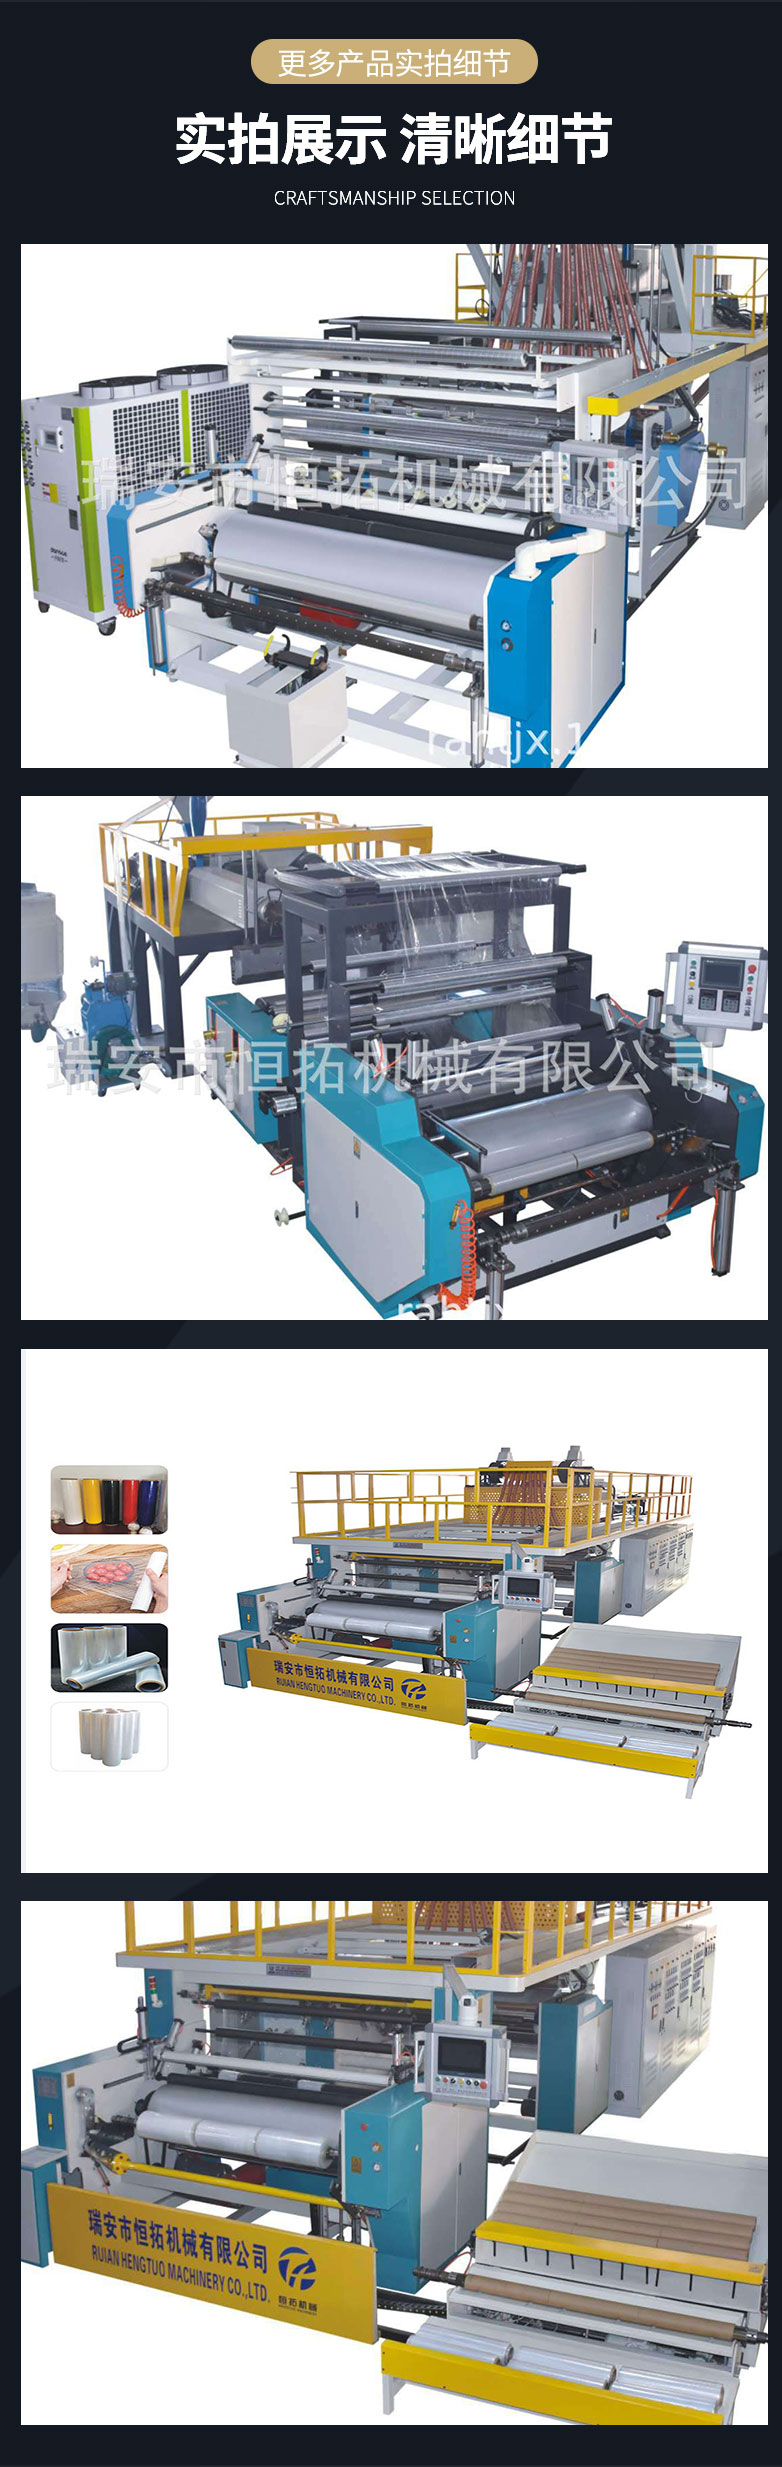 Fully automatic stretching and winding film machine, automatic loading and unloading of paper tubes, high-speed co extrusion of PE protective film machine, casting film machine